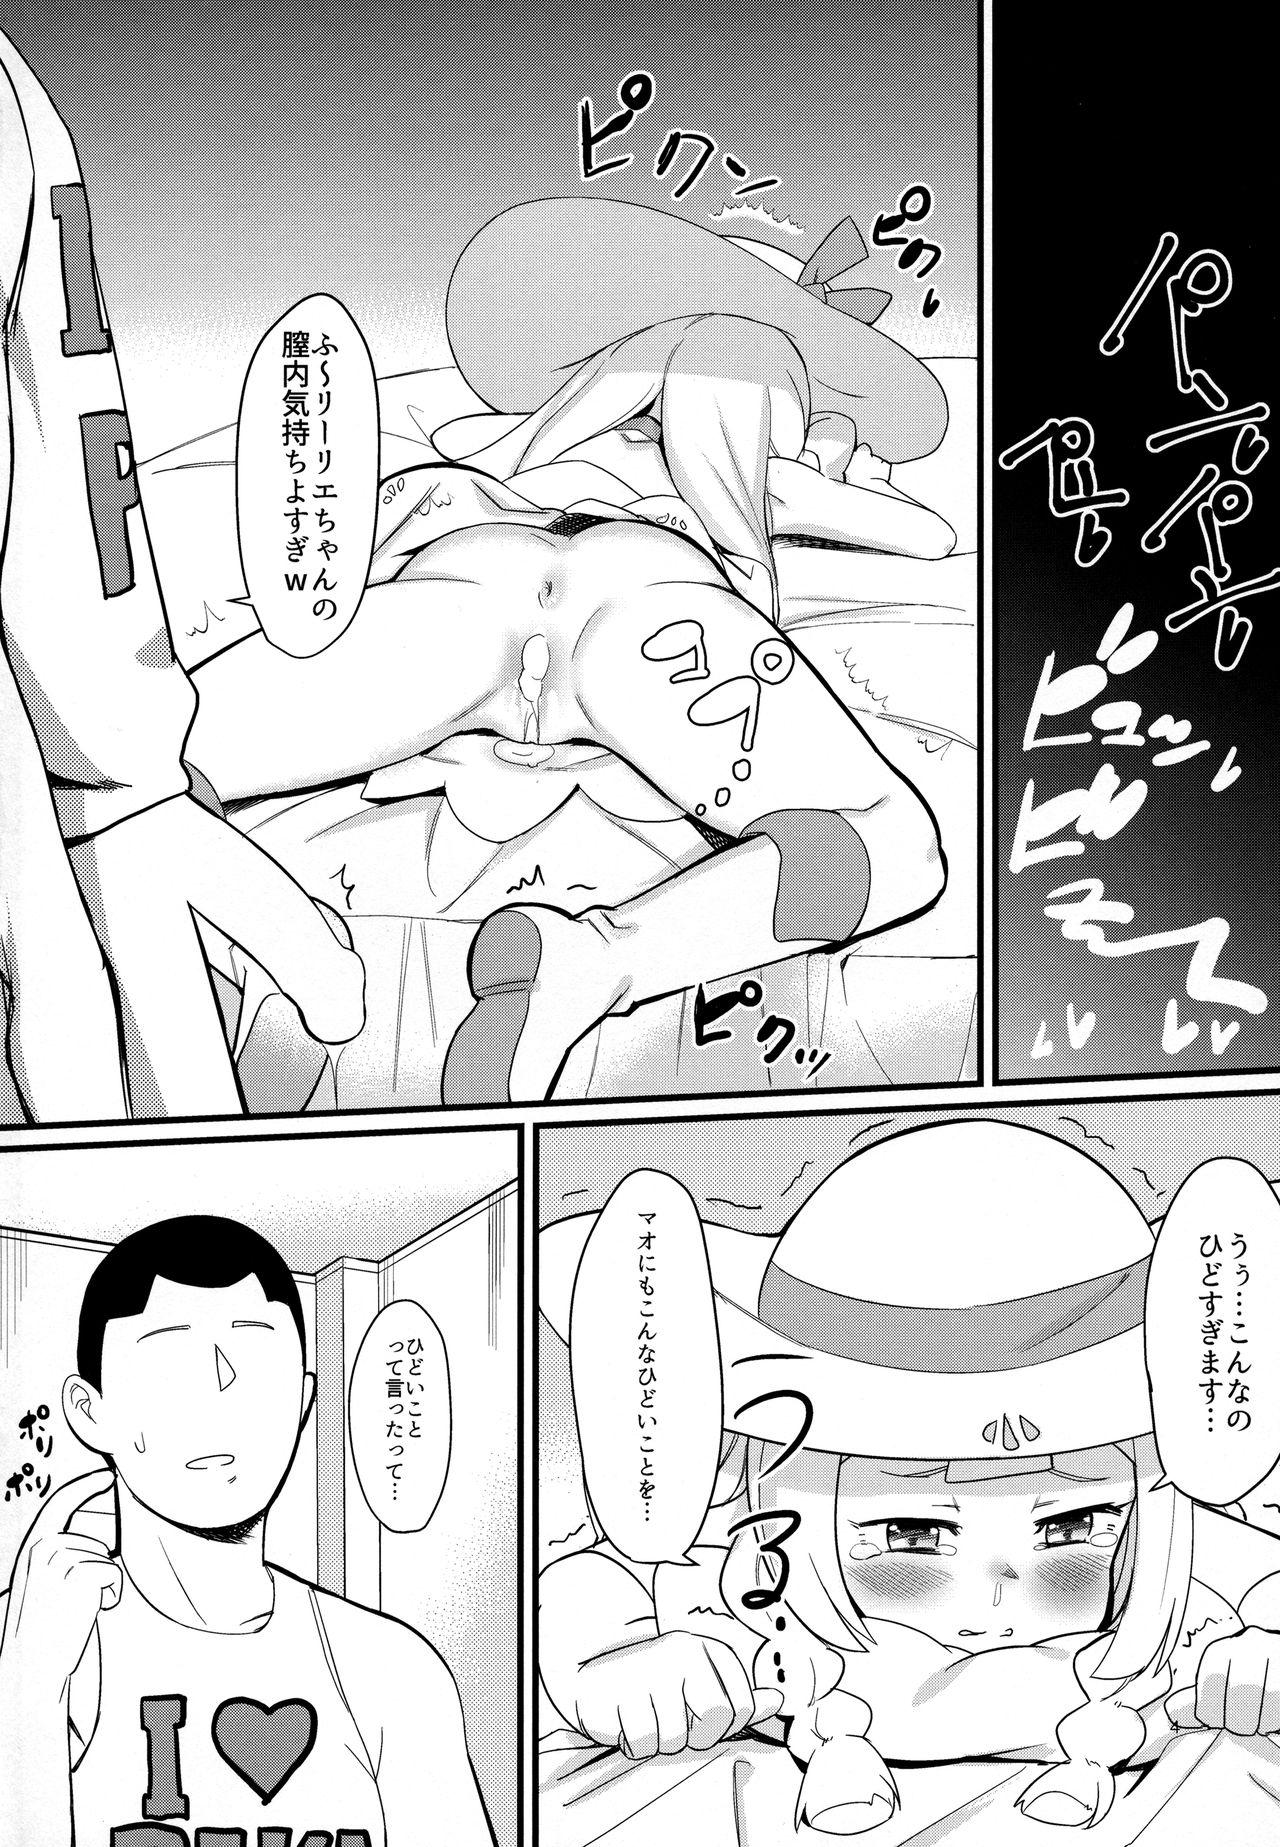 Old And Young Alola Fever!!! - Pokemon Grande - Page 3